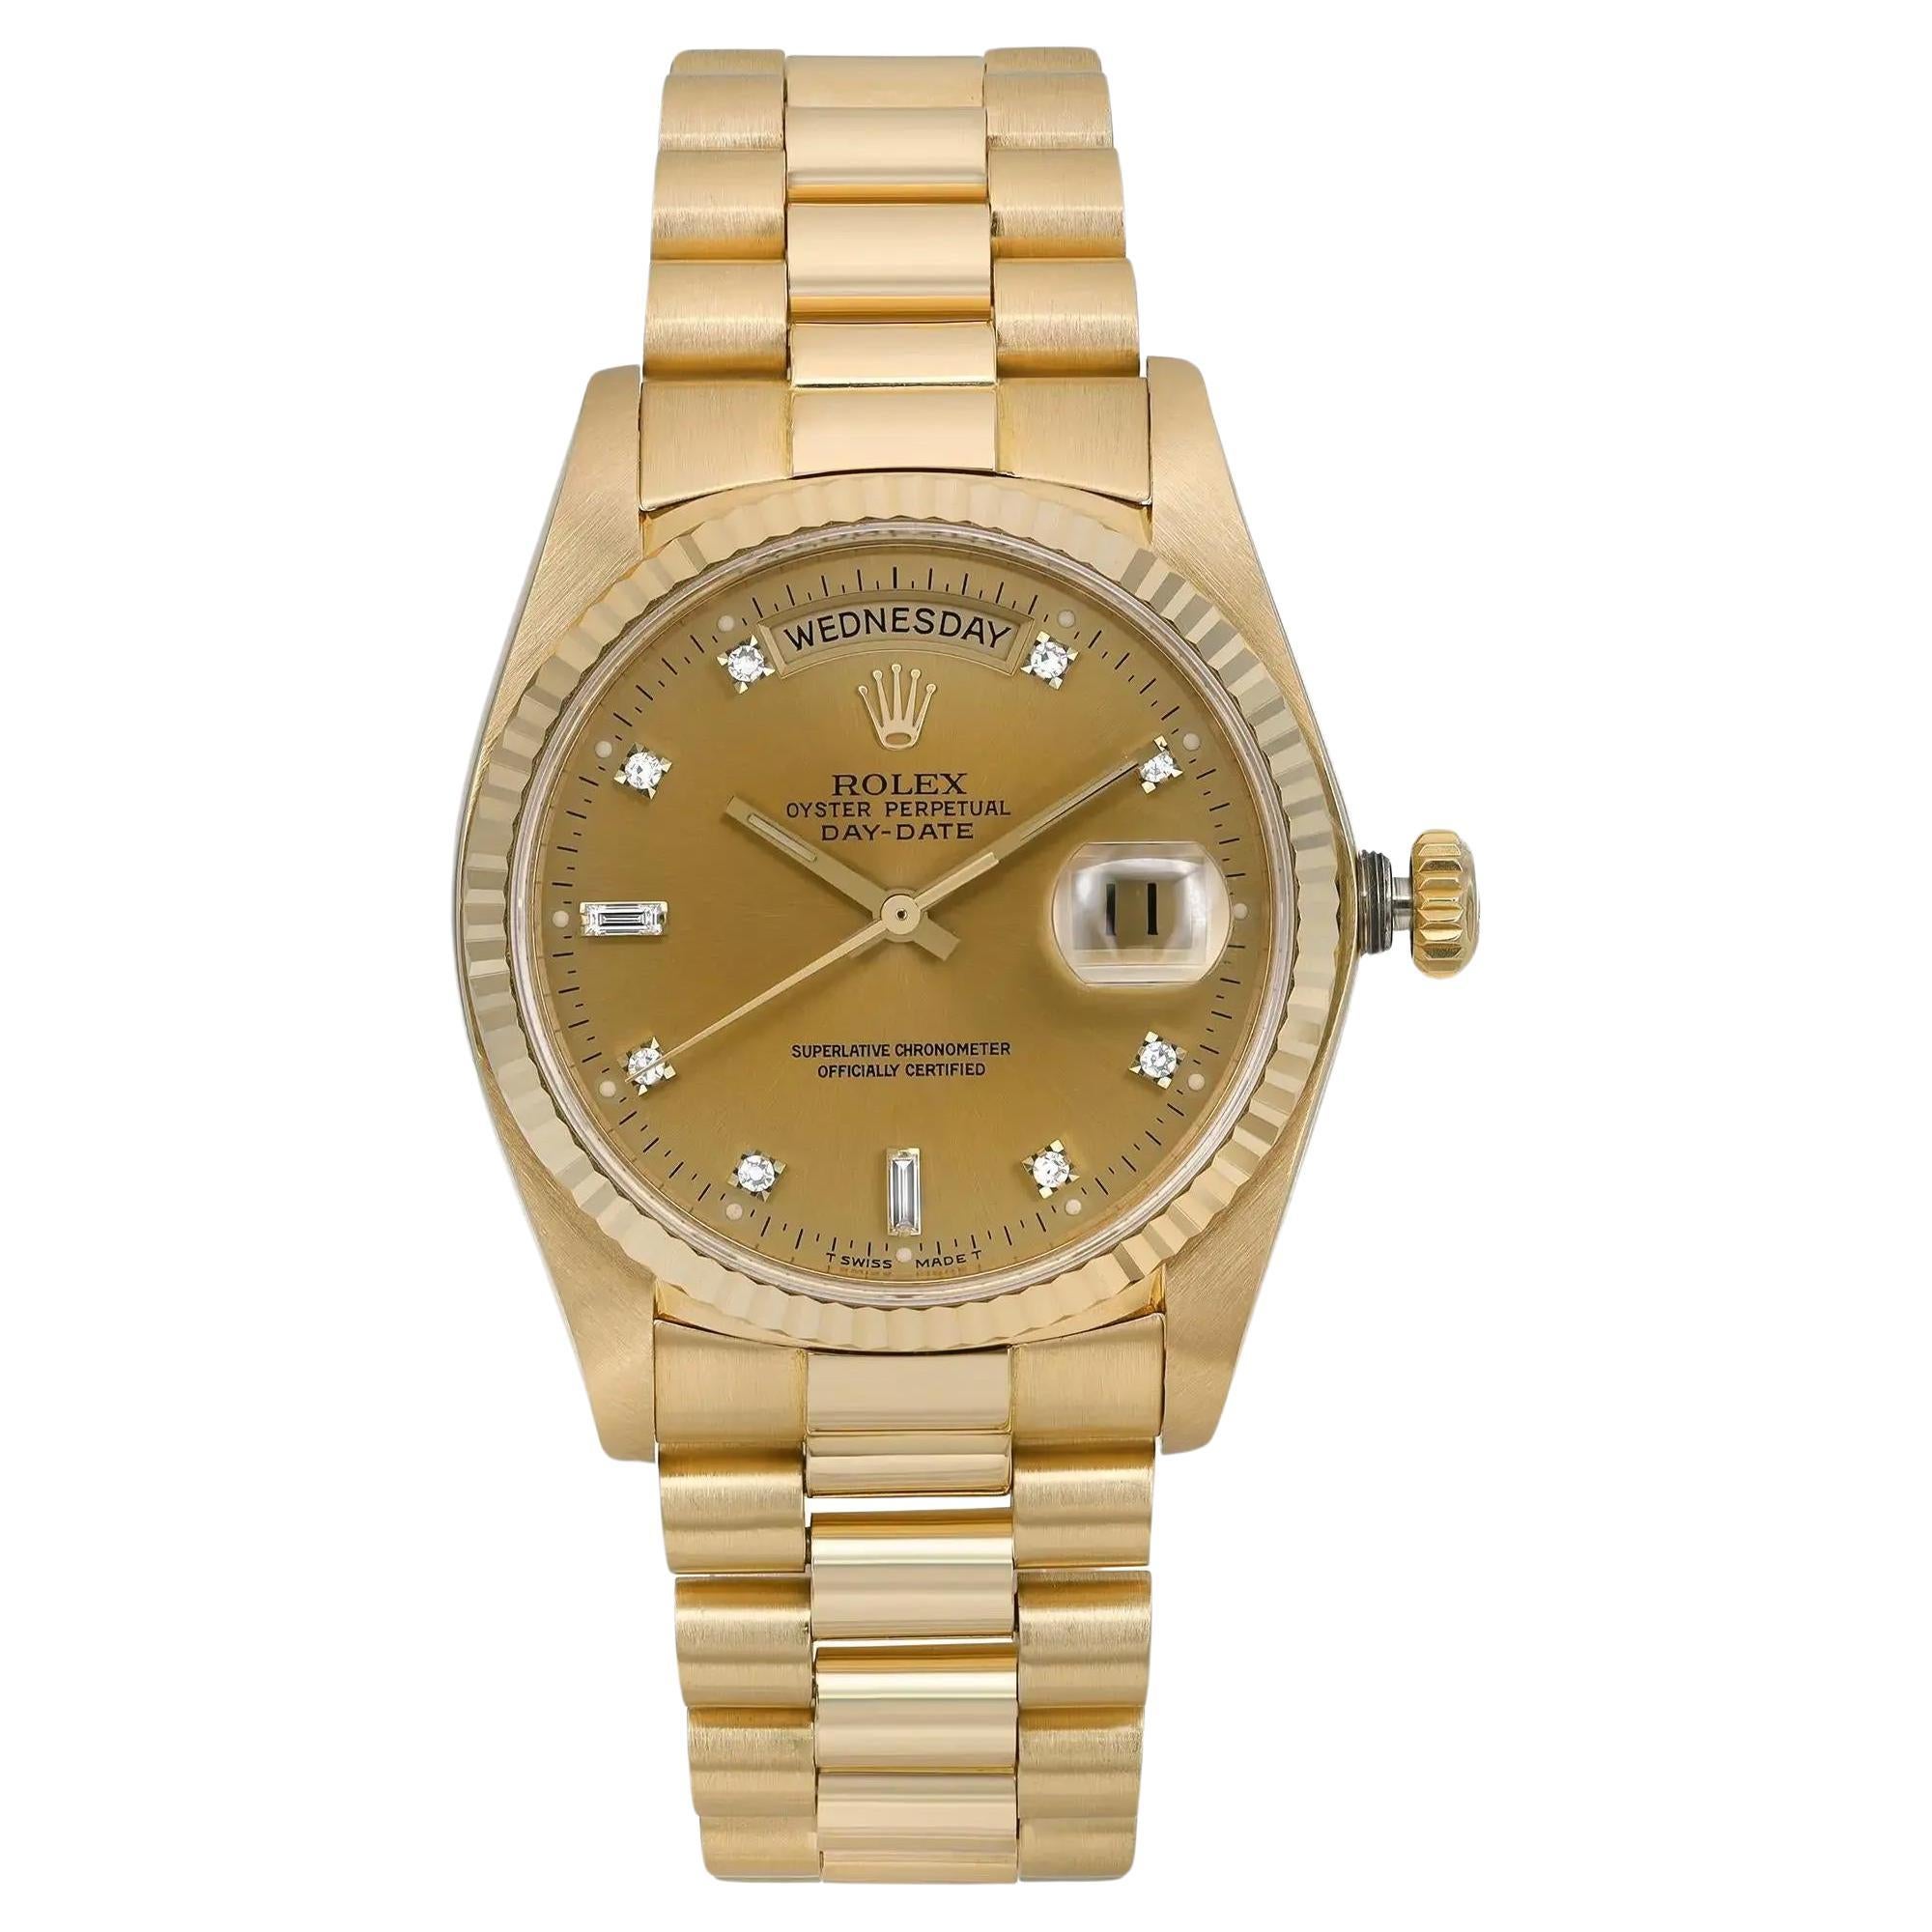 Rolex Day-Date 36mm 18K Gold Champagne Diamond Dial Automatic Mens Watch 18038A For Sale